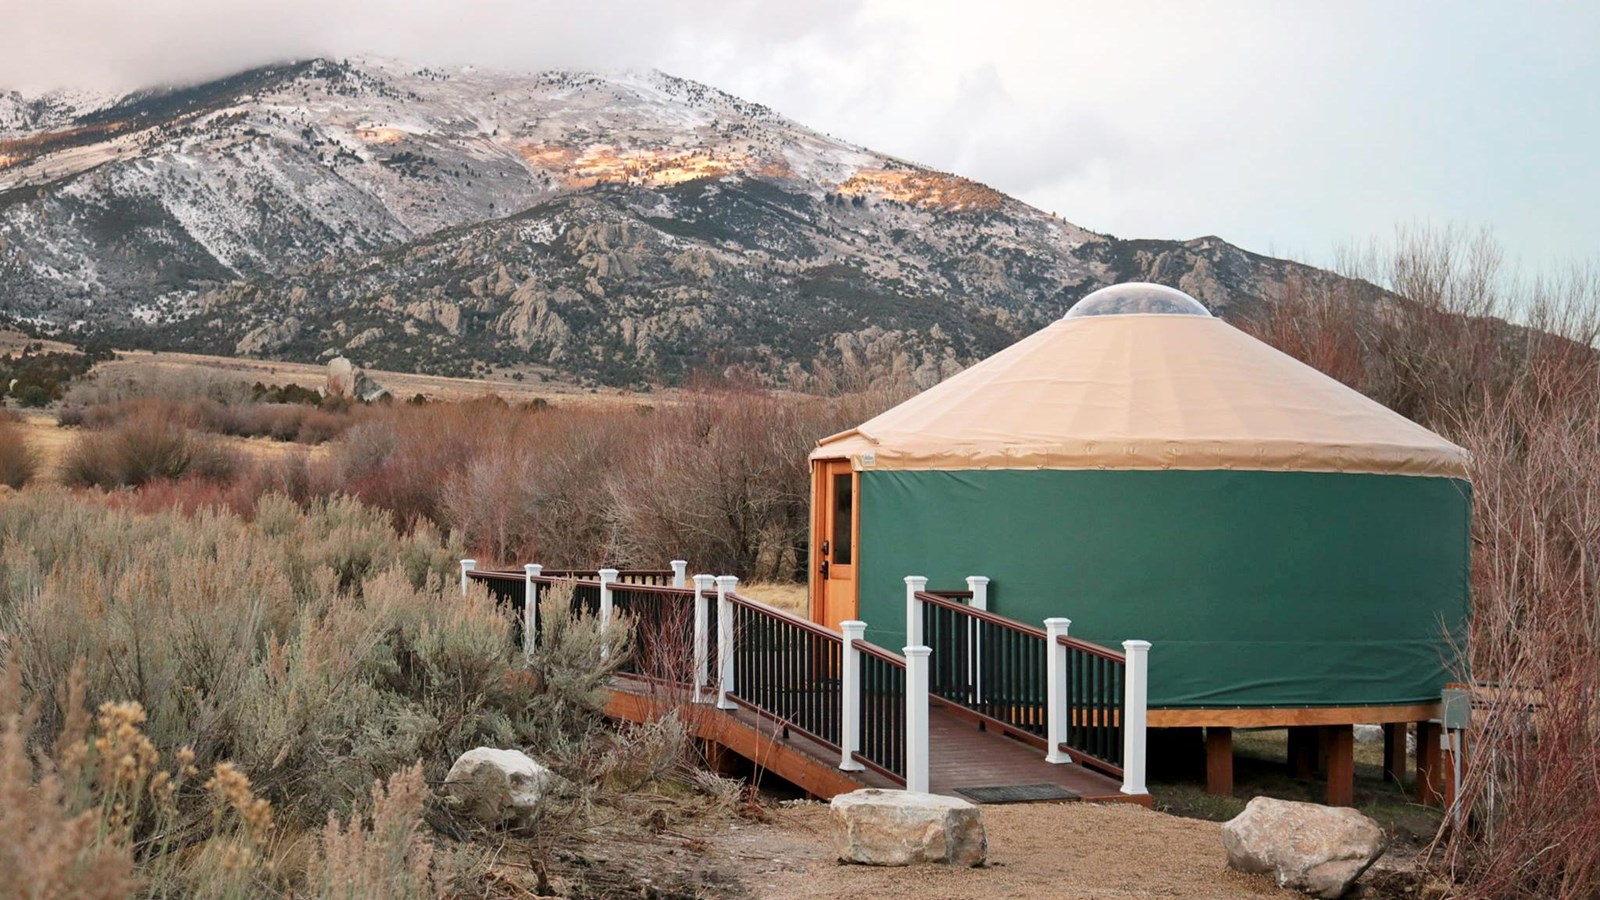 Yurt with deck at sunset with snow capped mountains in the back drop.